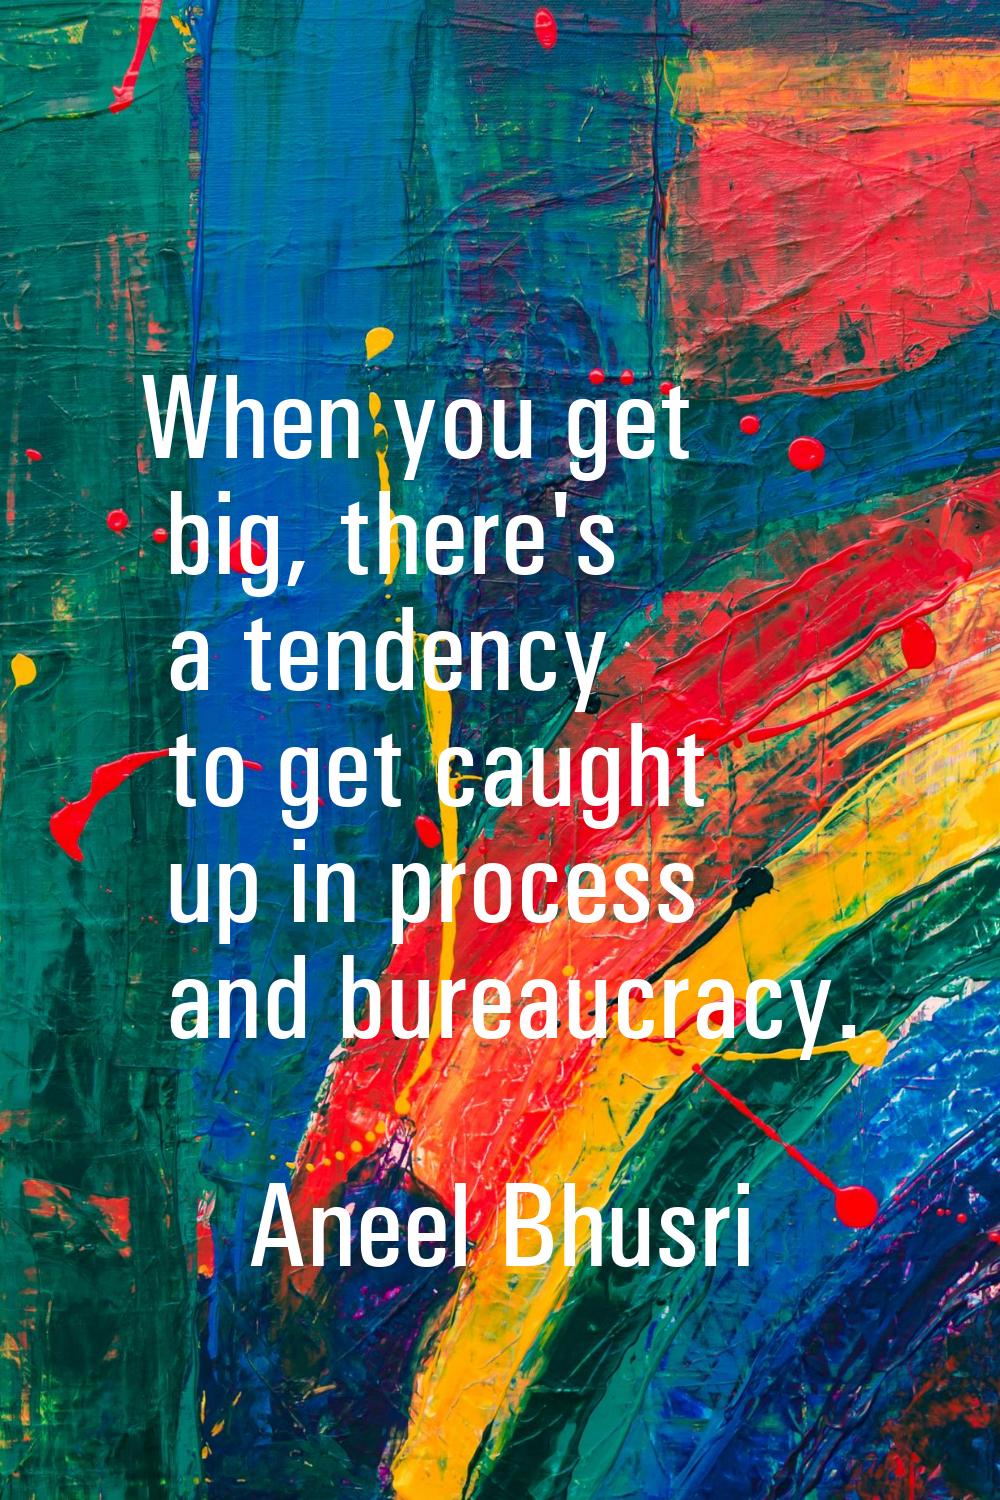 When you get big, there's a tendency to get caught up in process and bureaucracy.